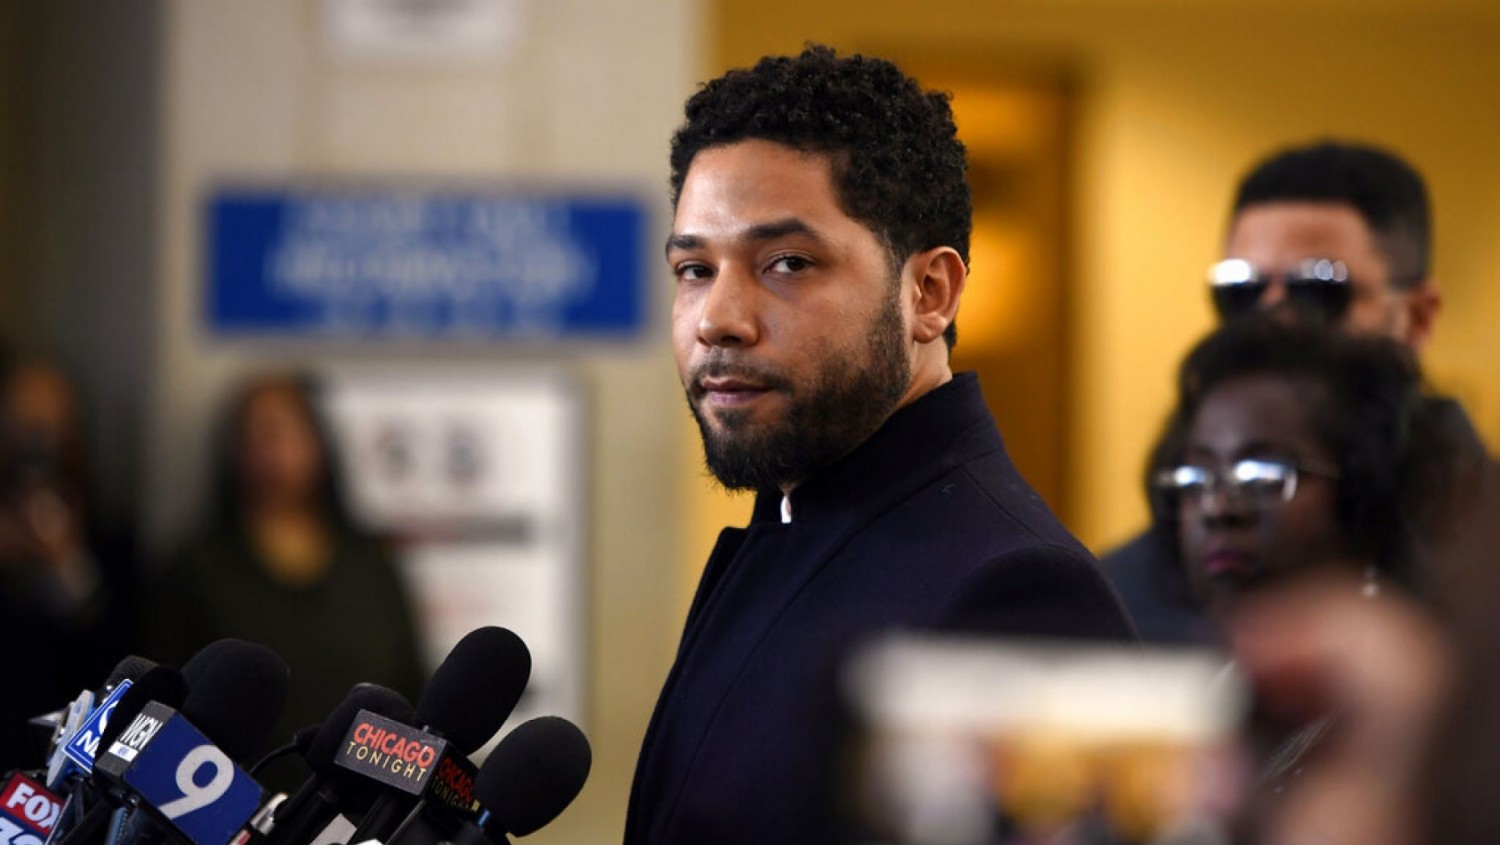 Wendy Williams suggests Jussie Smollett's career is over, criticizes new charges brought against him